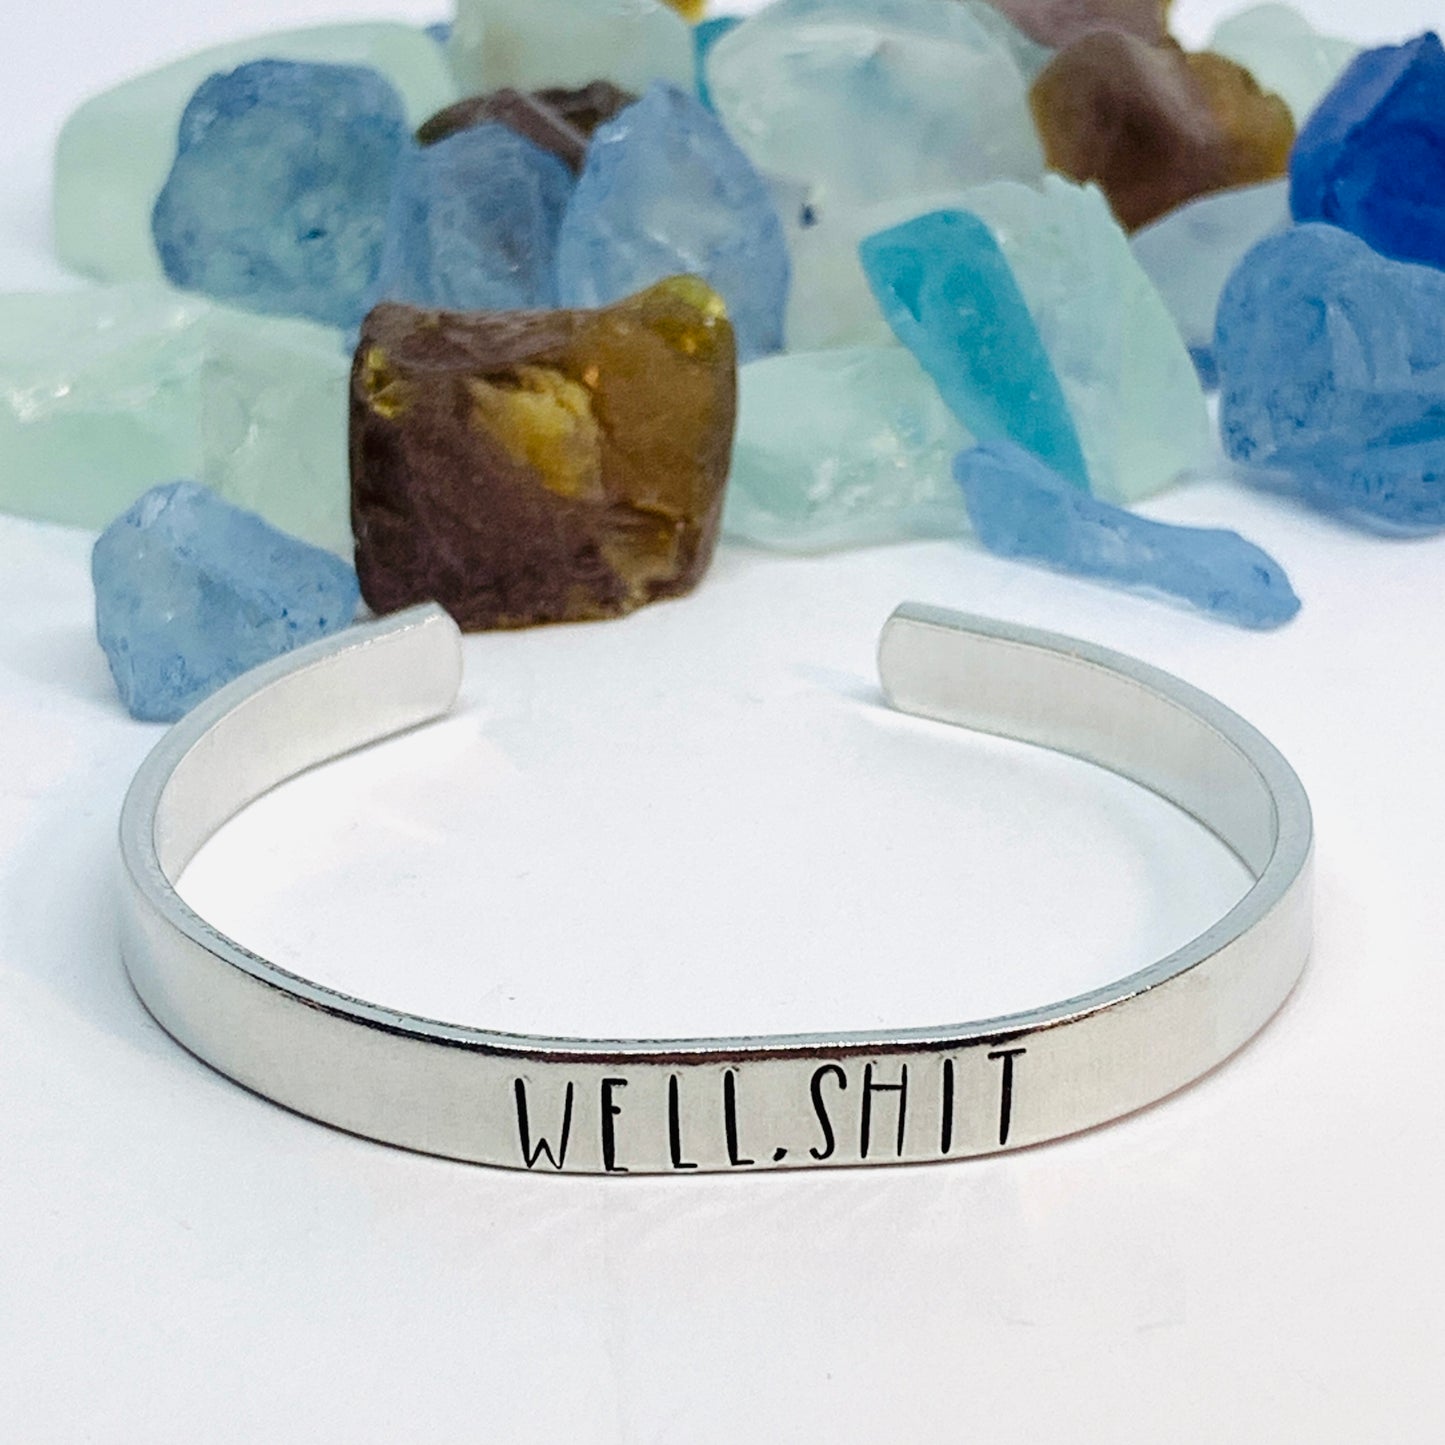 Well, shit - Hand Stamped Cuff Bracelet - Adult Mature